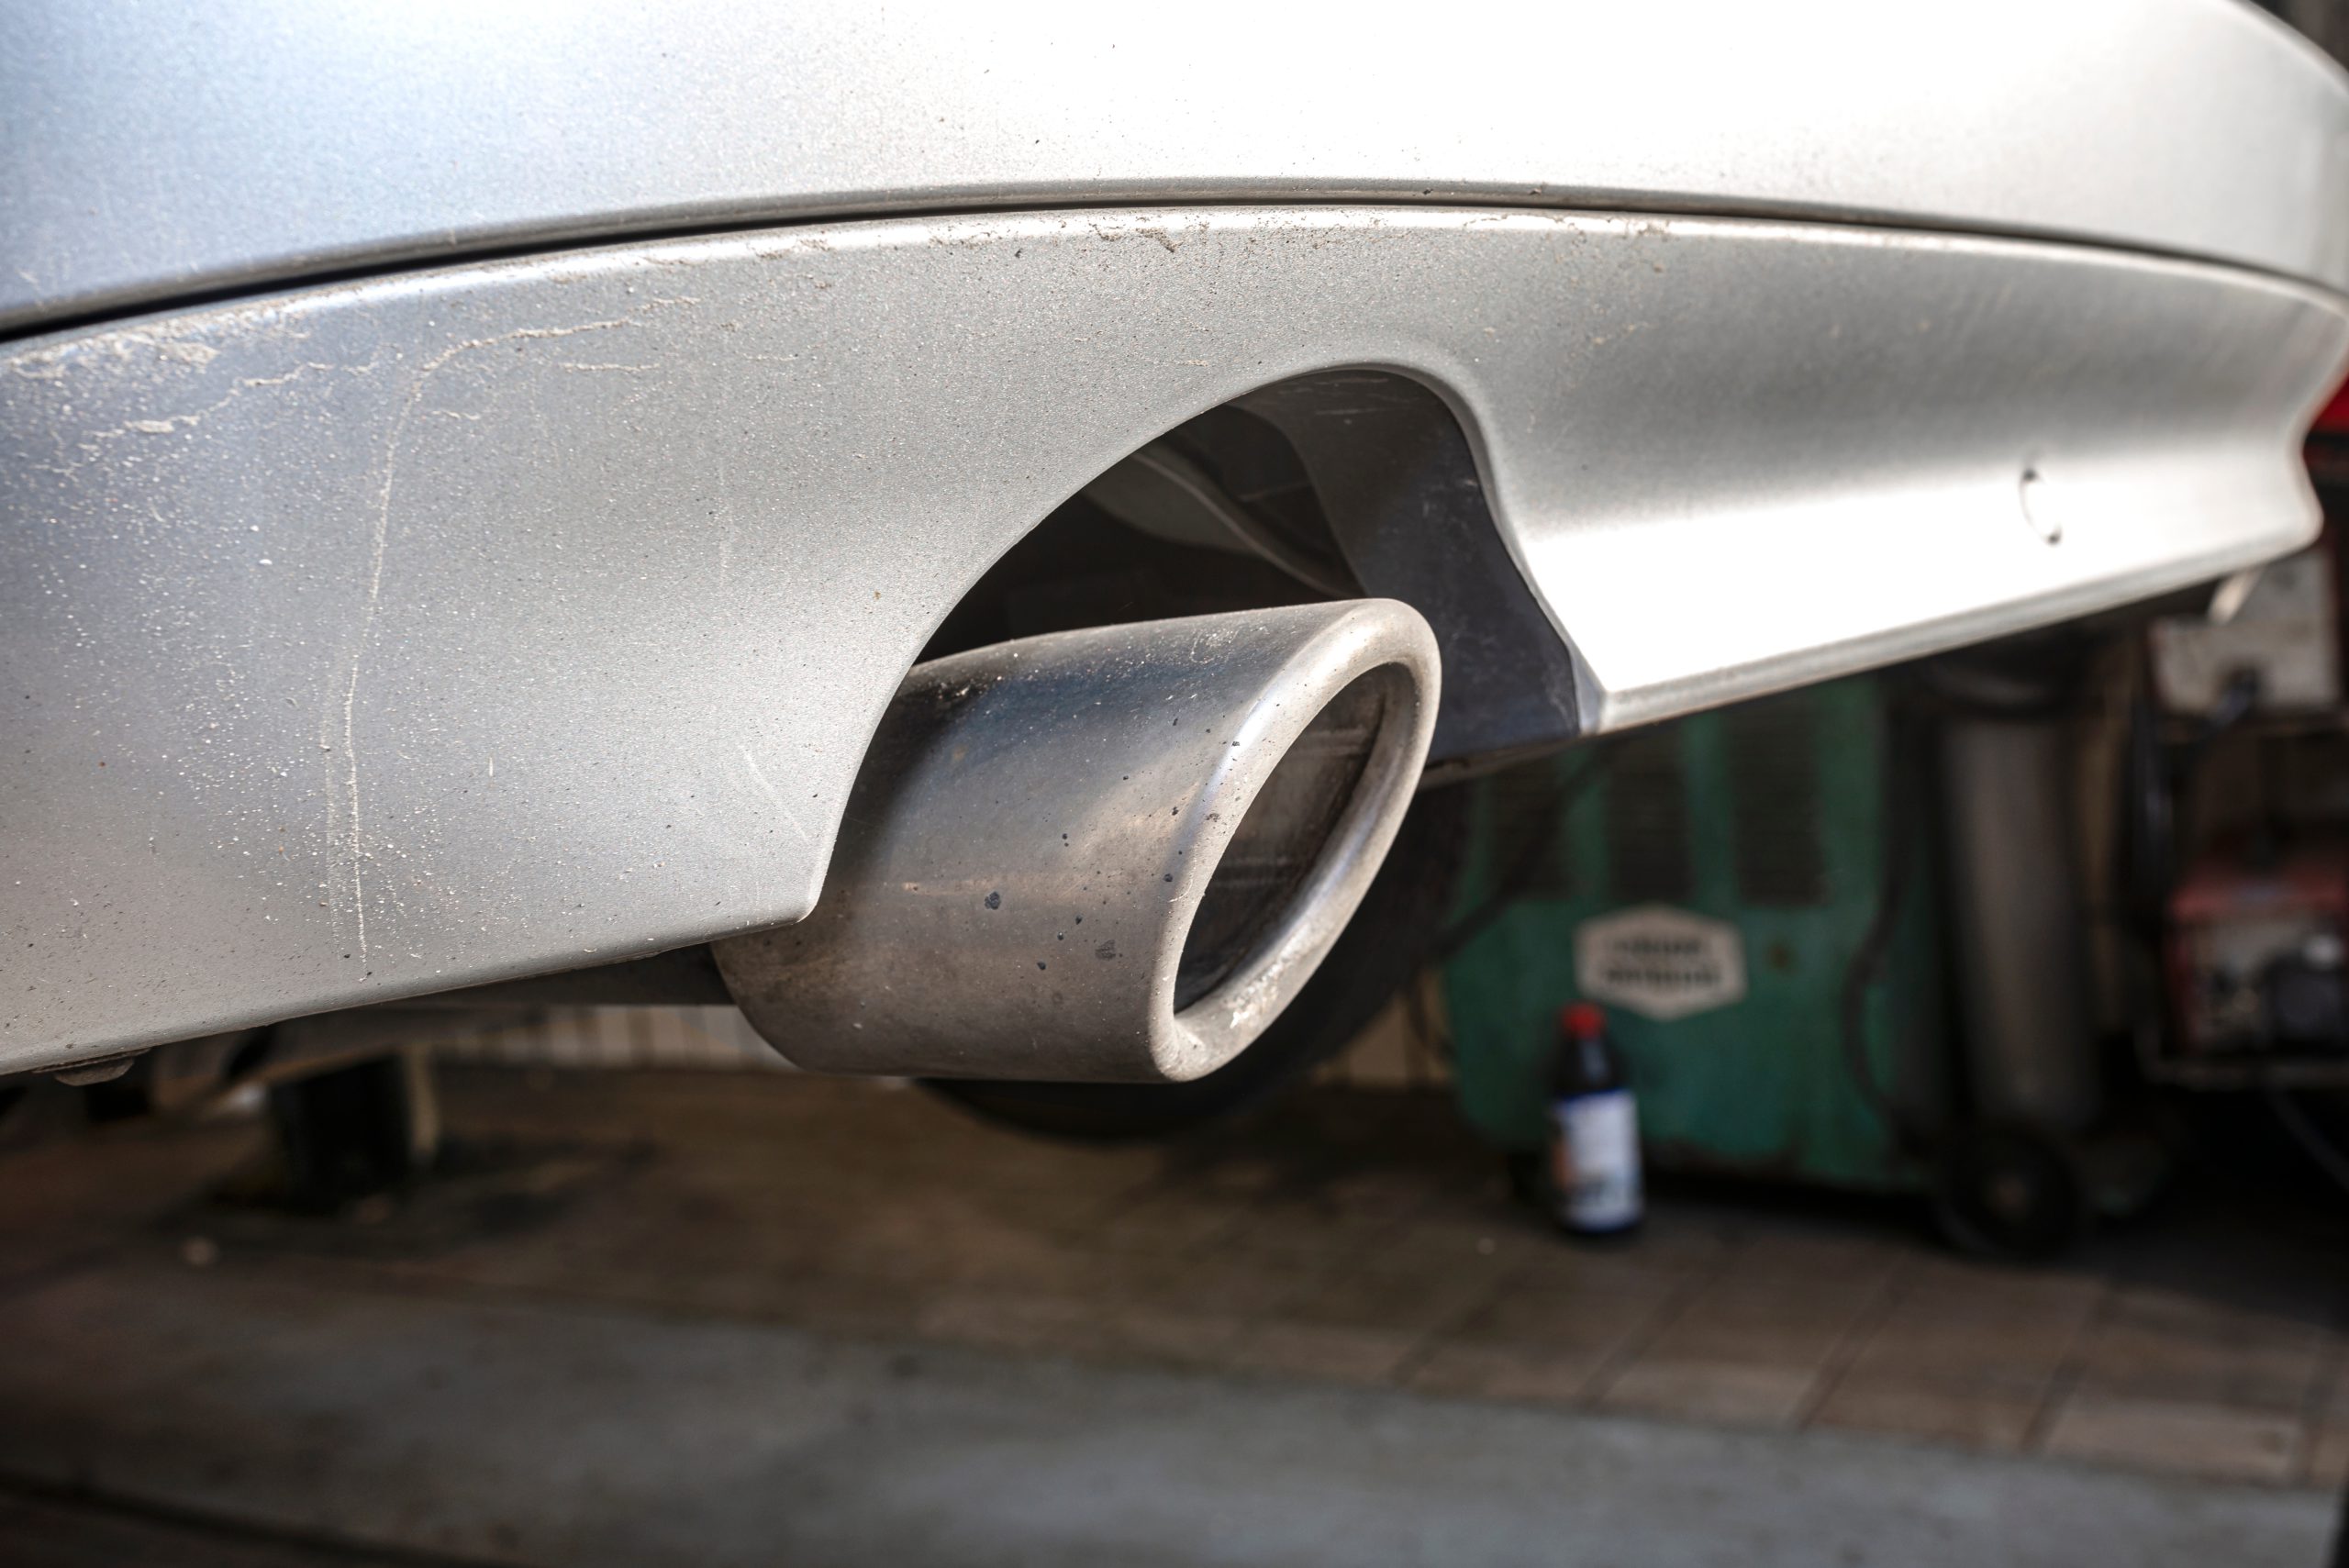 https://autolab.com.co/wp-content/uploads/the-exhaust-system-in-the-diesel-car-seen-up-close-2023-11-27-04-53-31-utc-scaled.jpg